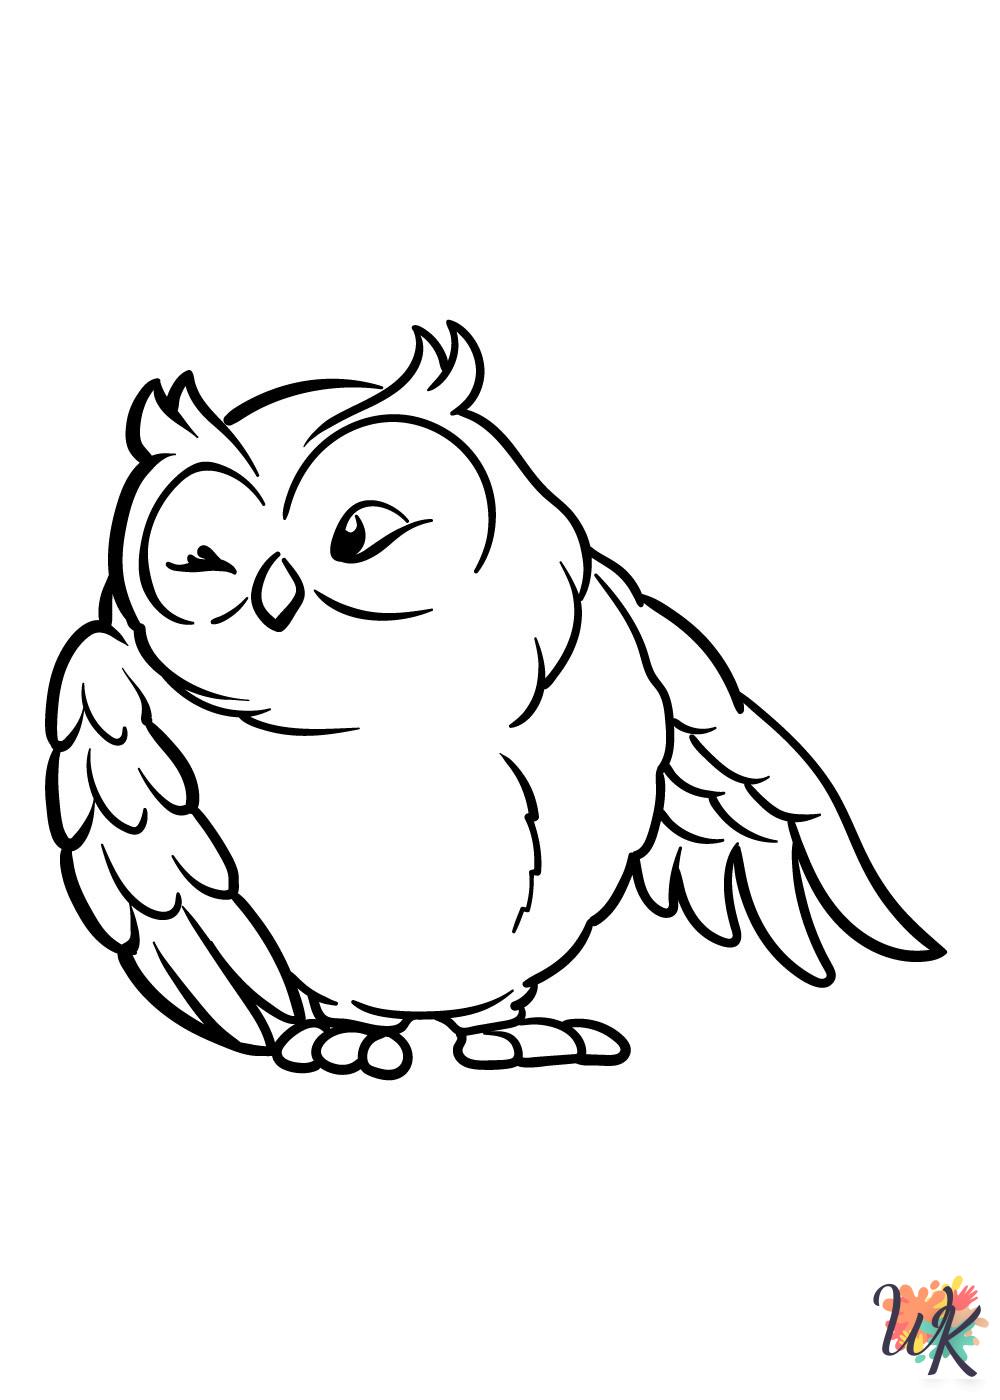 Owl adult coloring pages